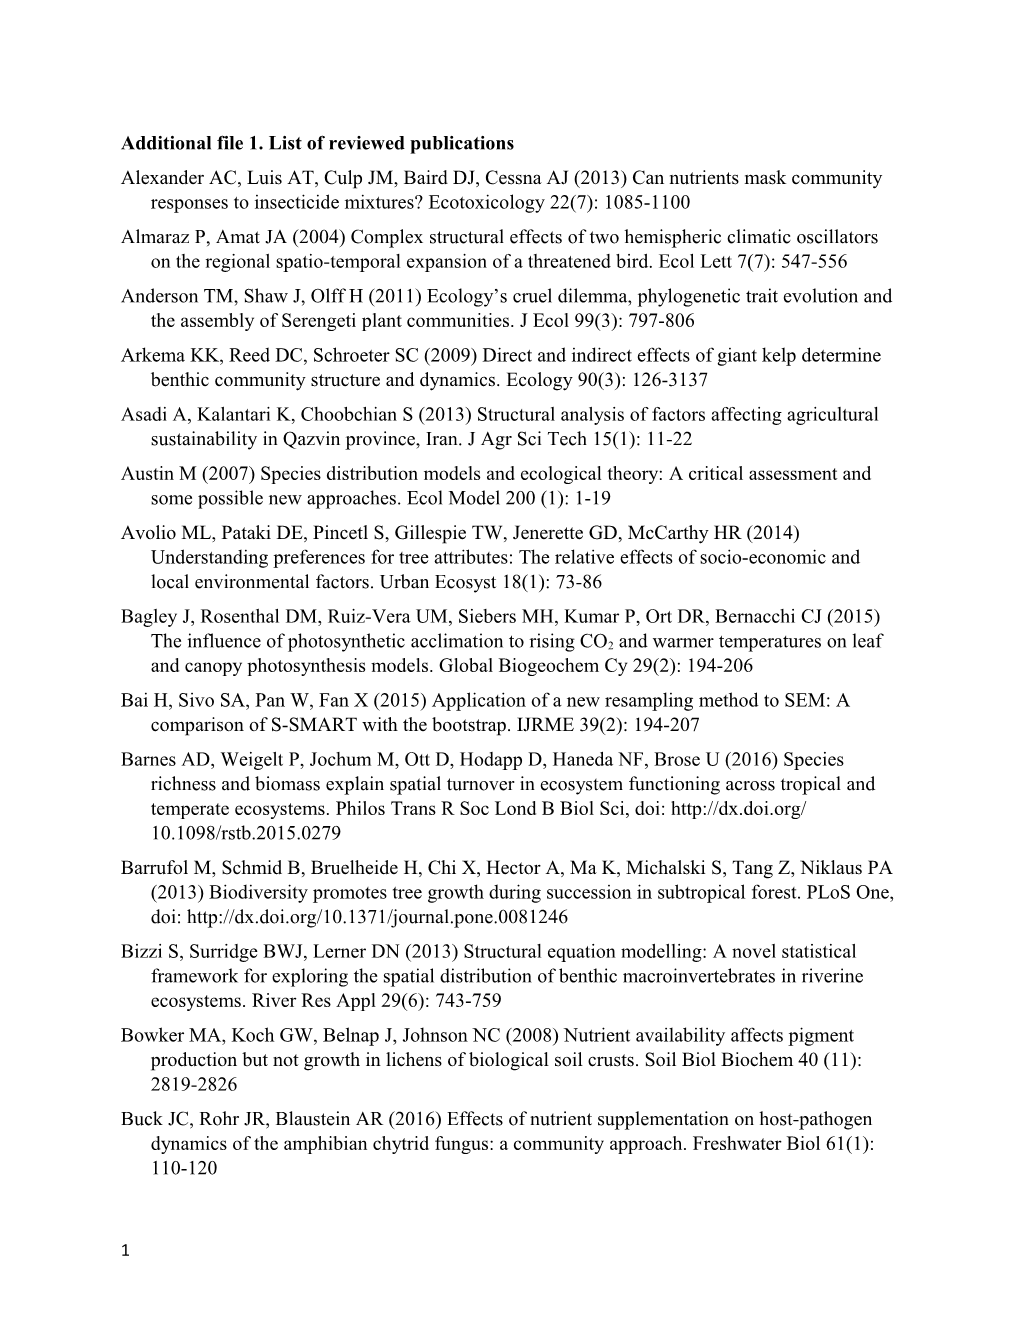 Additional File1. List of Reviewed Publications